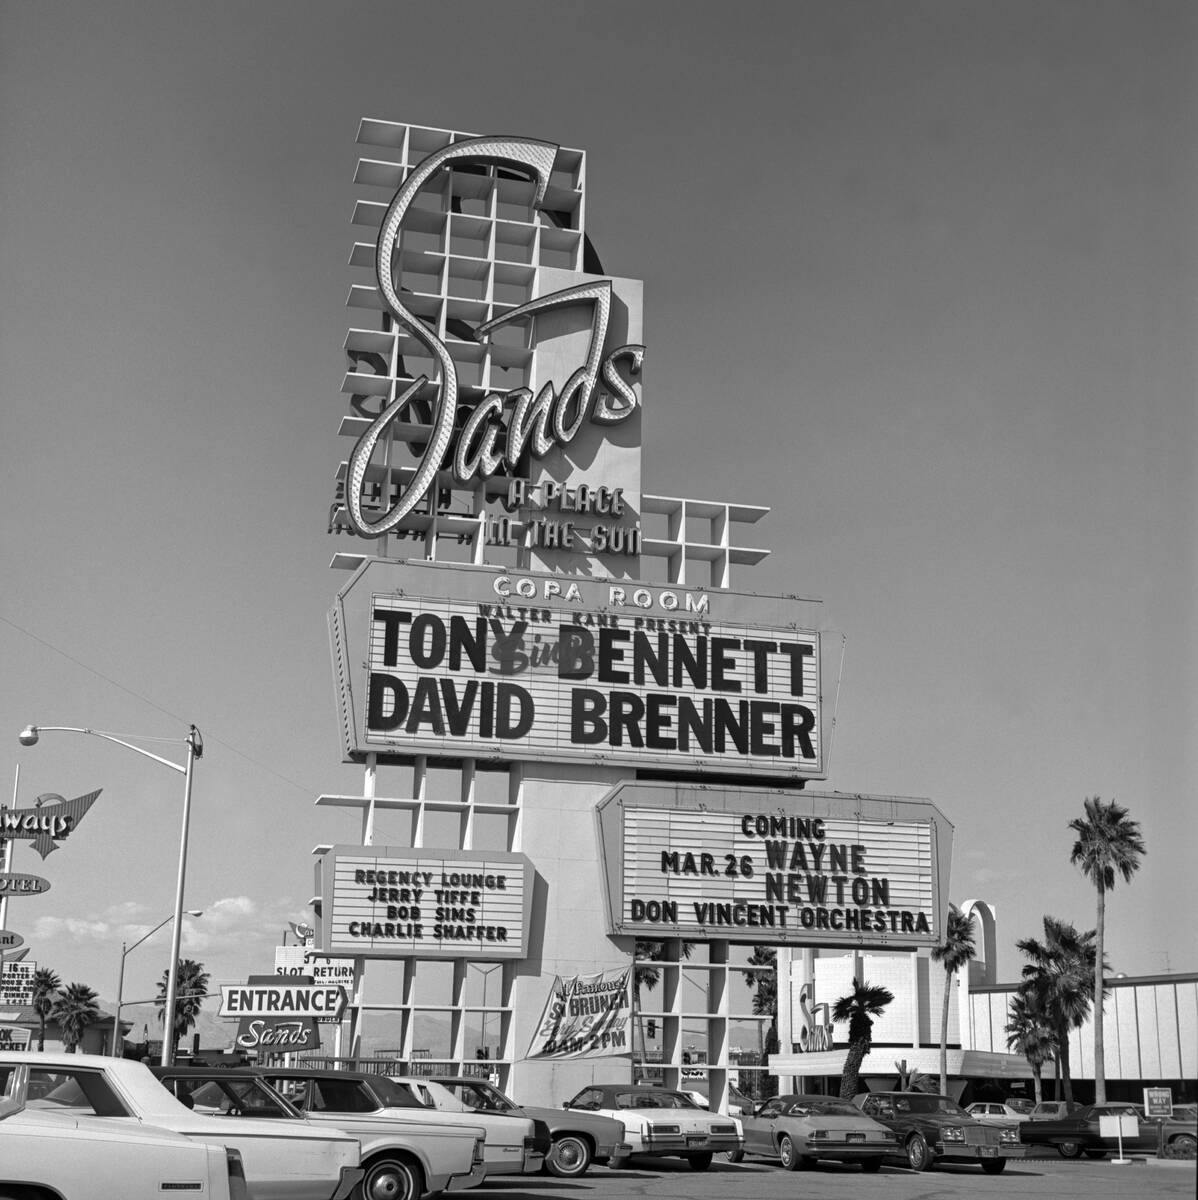 Tony Bennett and David Brenner marquee at the Sands on March 19, 1980. (Las Vegas News Bureau)